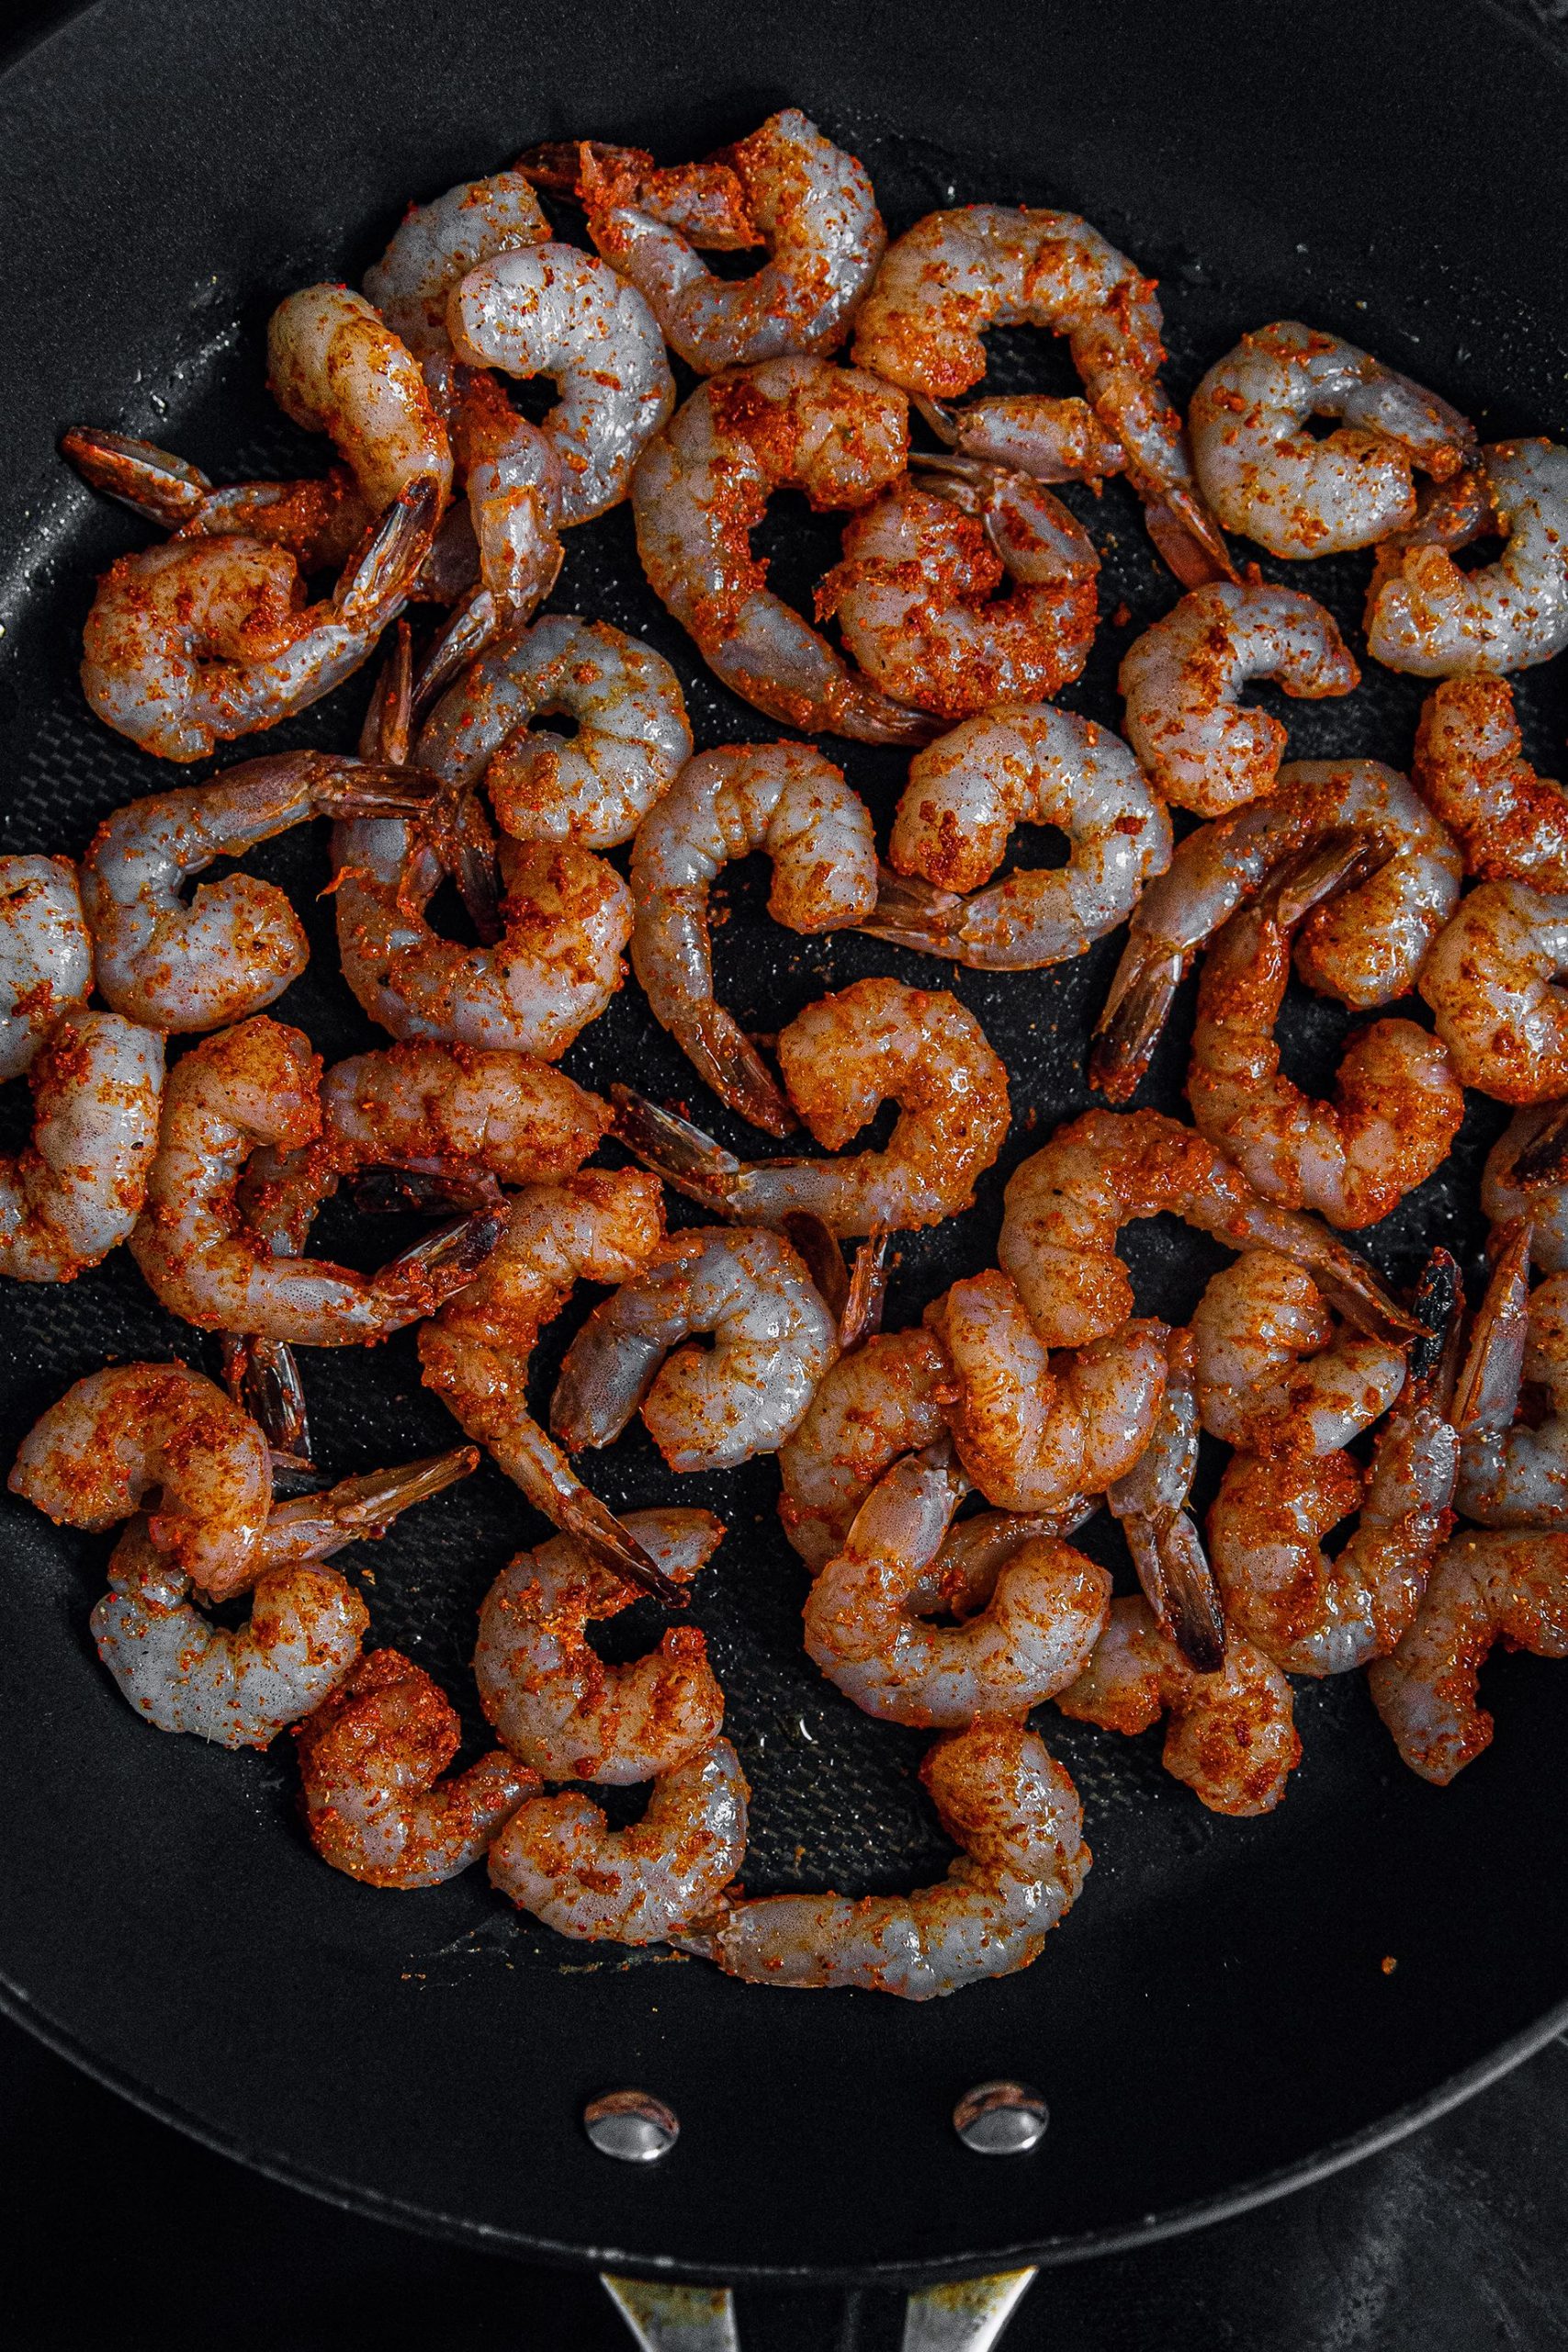 Add oil to a skillet on medium high heat and cook shrimp 2-3 minutes a side until pink and cooked through. 